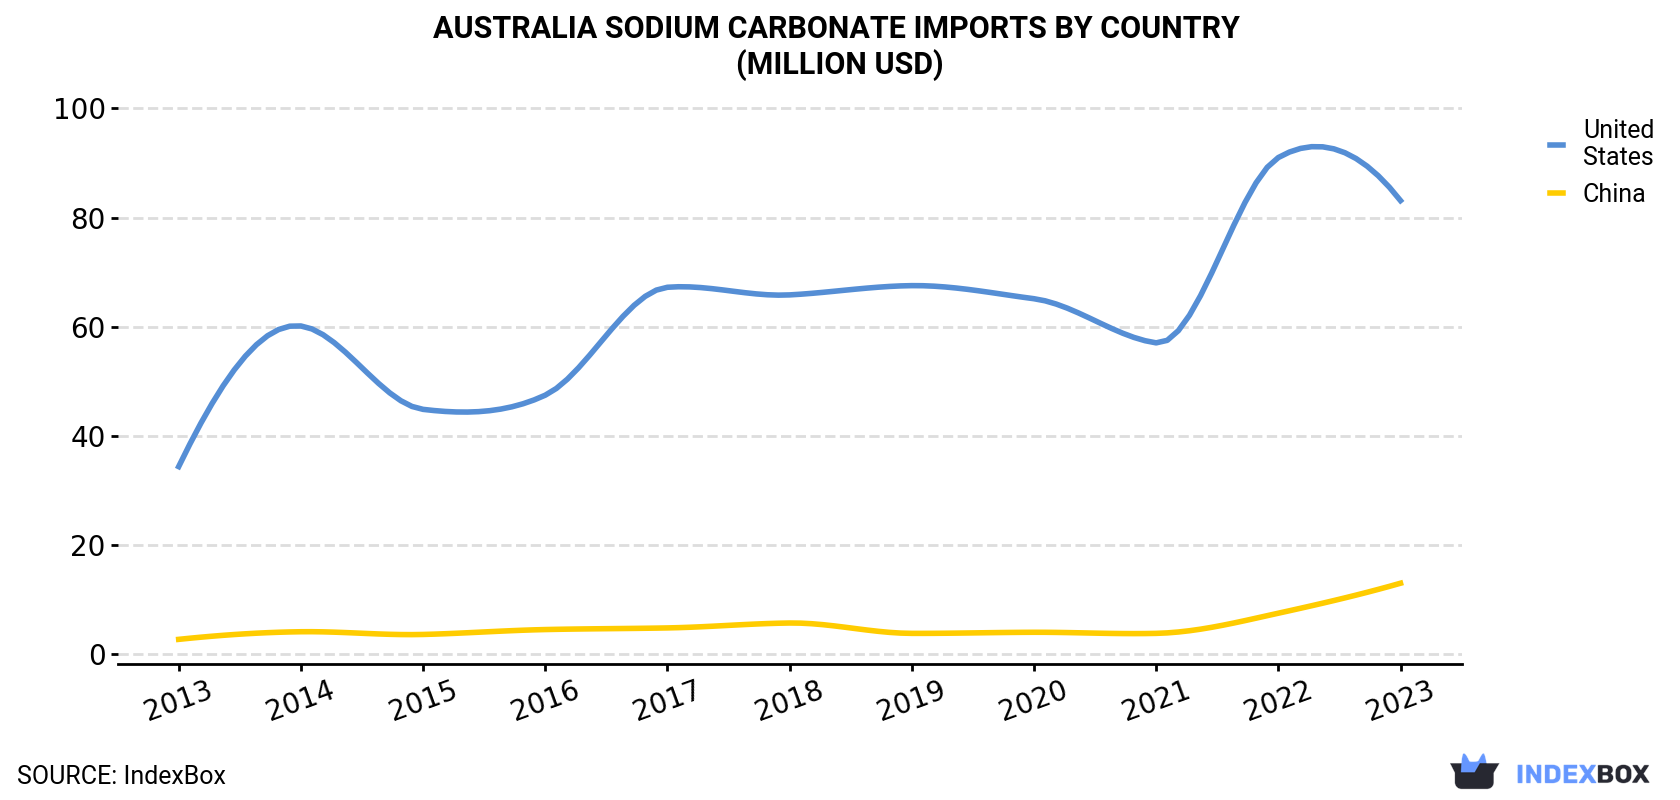 Australia Sodium Carbonate Imports By Country (Million USD)